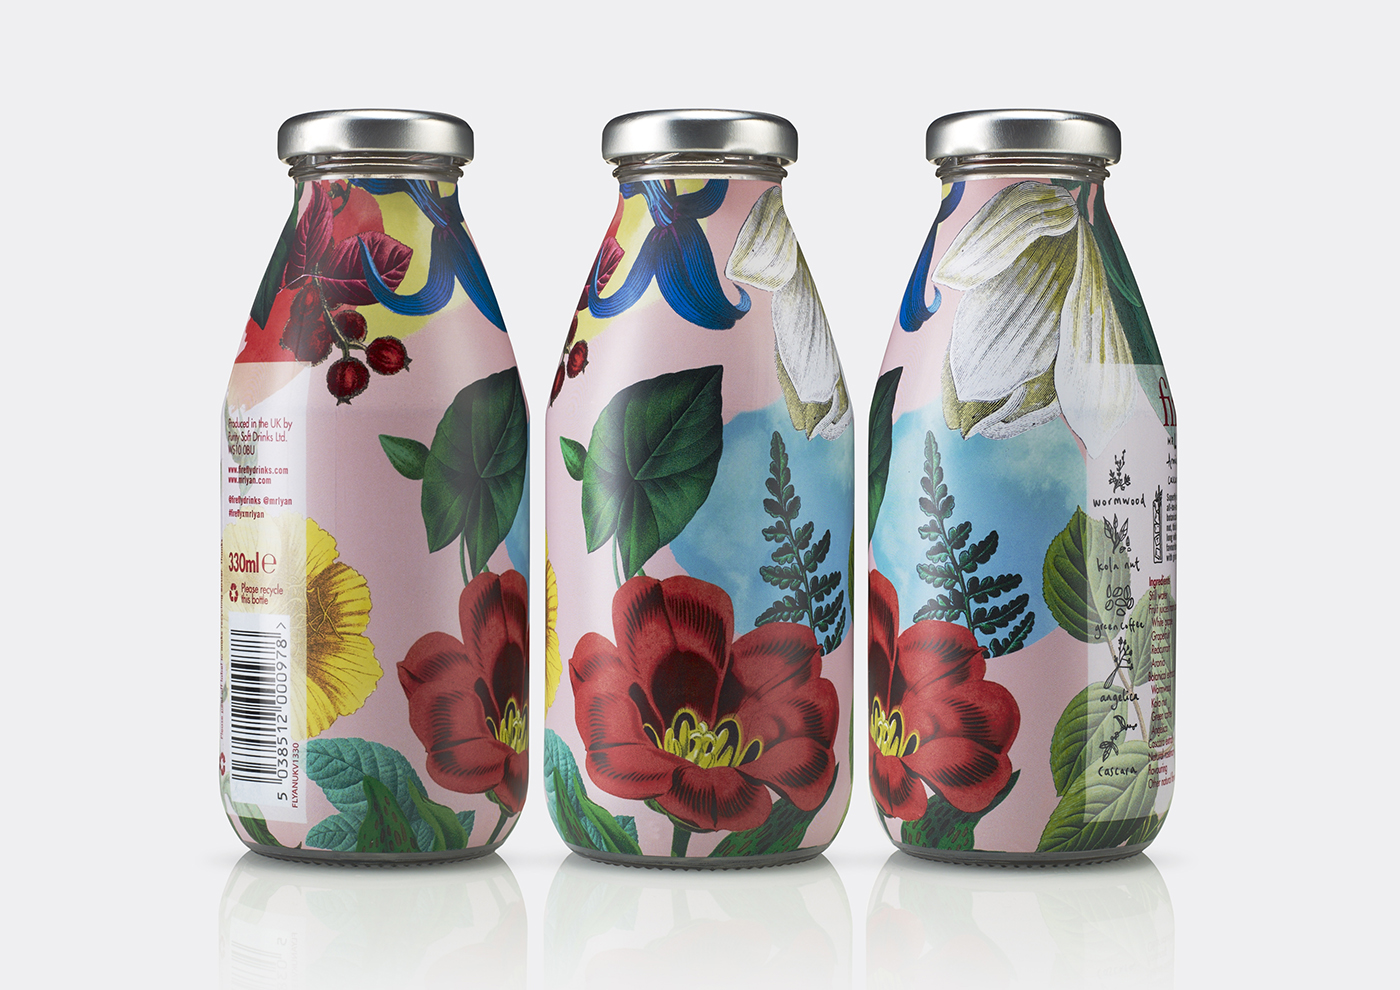 Illustrative packaging by B&B Studio for Firefly and Mr Lyan non-alcoholic cocktail collaboration Superfly